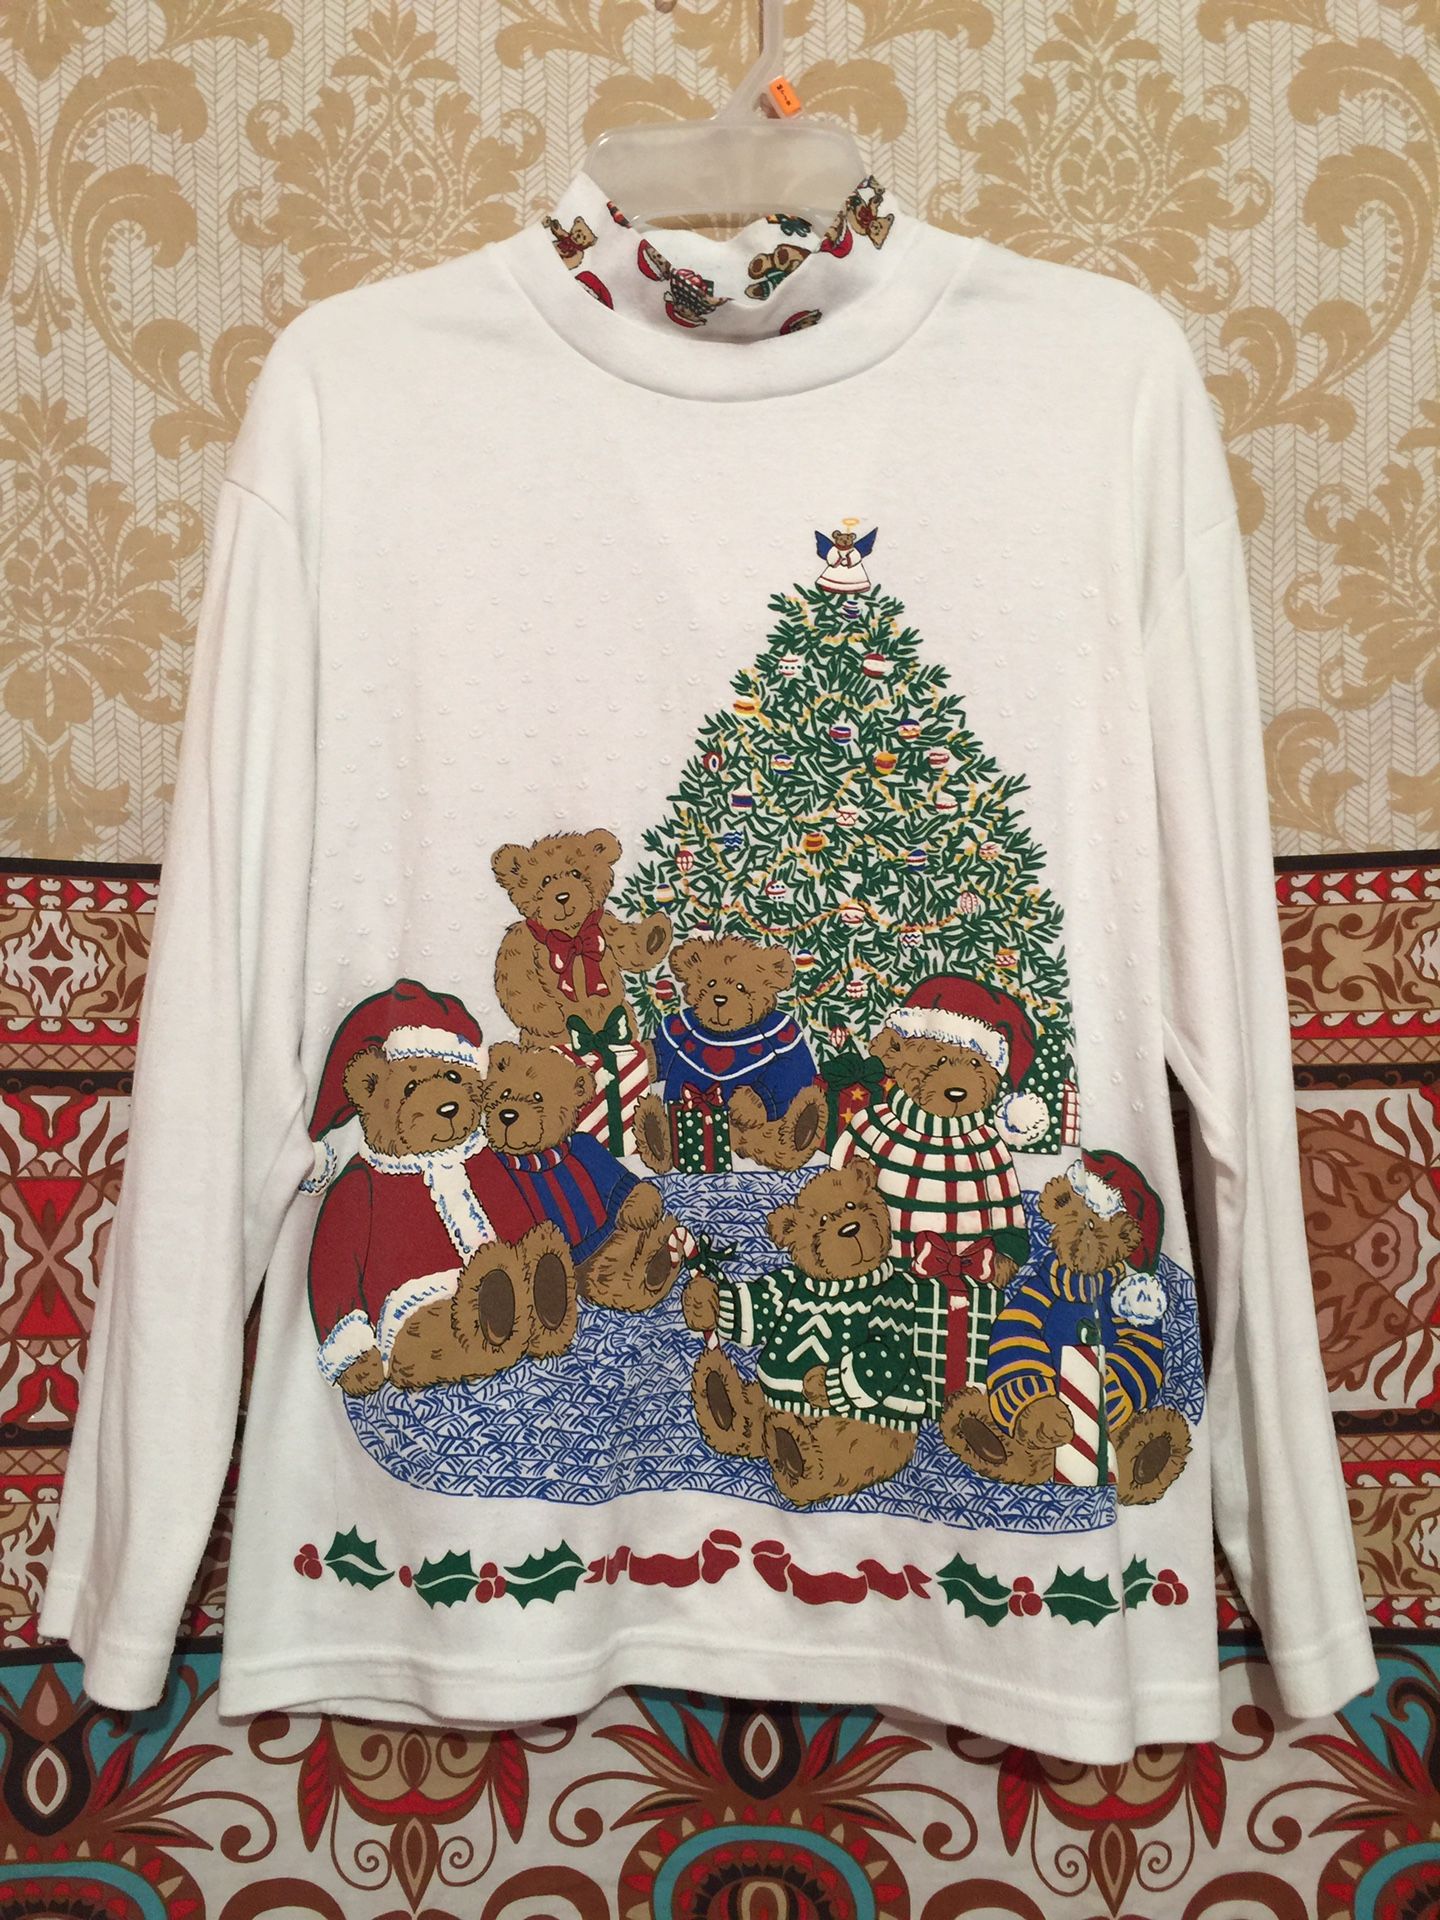 Beautiful Christmas sweater / XL ✨🎄 Clean- in new Condition